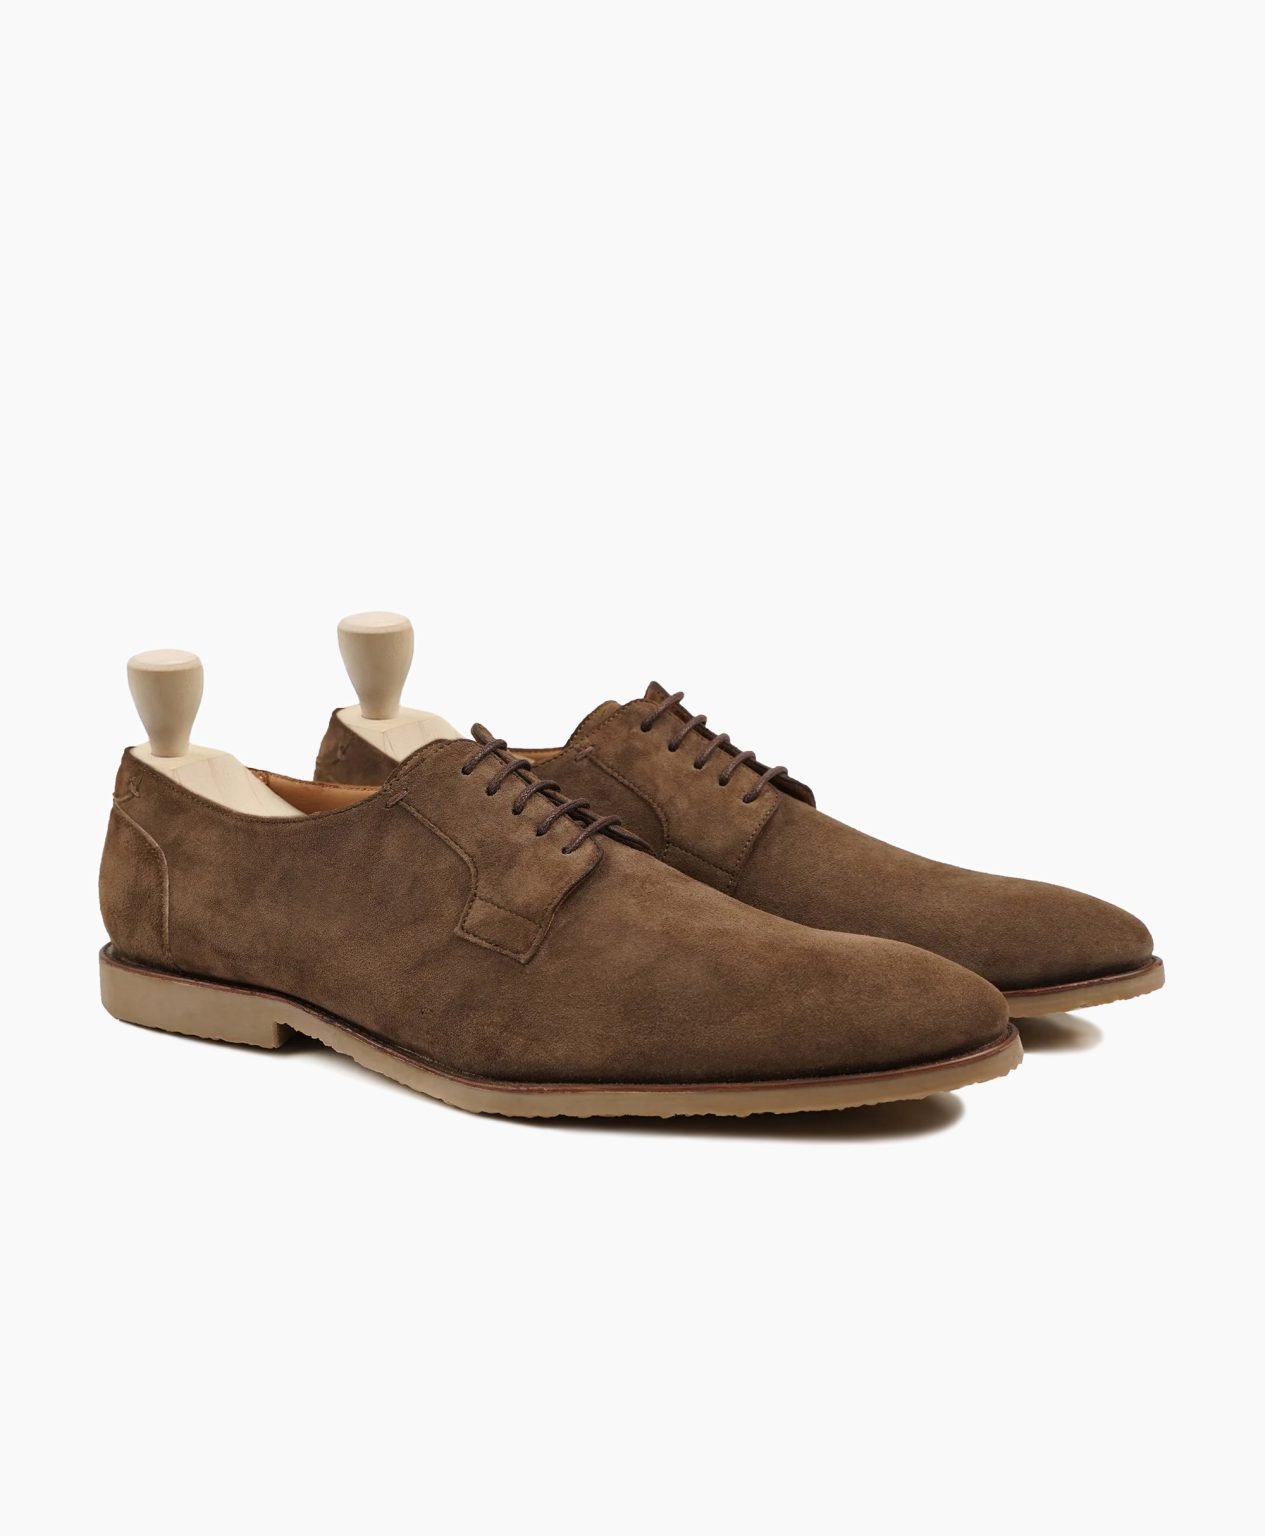 bolsover-derby-brown-suede-leather-shoes-image200